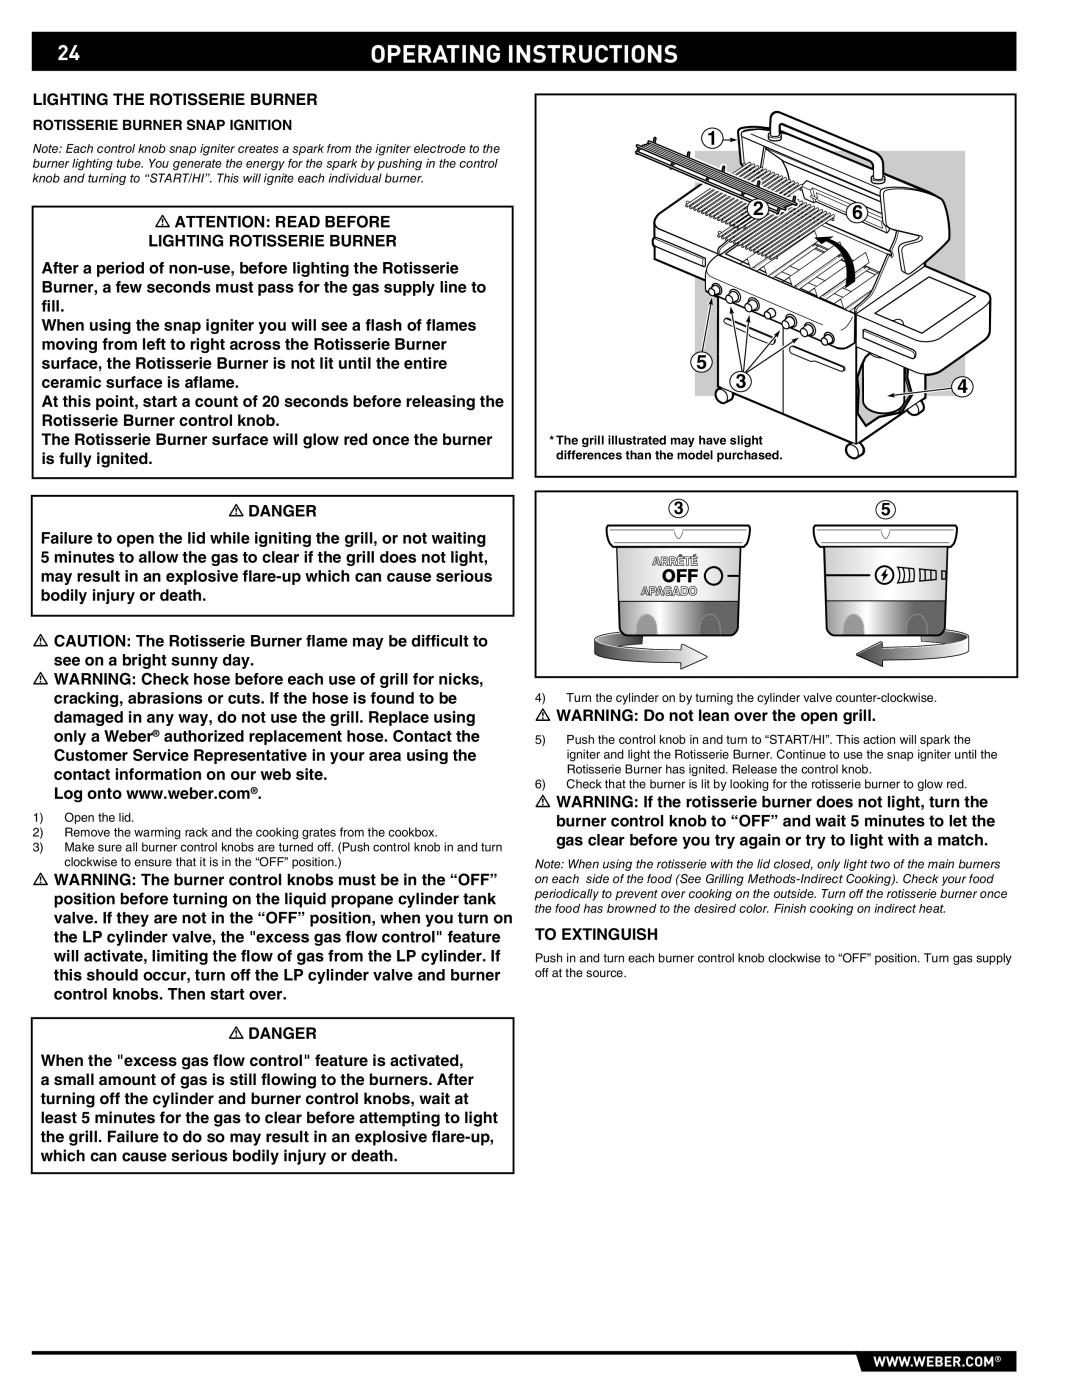 Summit 89190 manual Operating Instructions, Rotisserie Burner Snap Ignition 